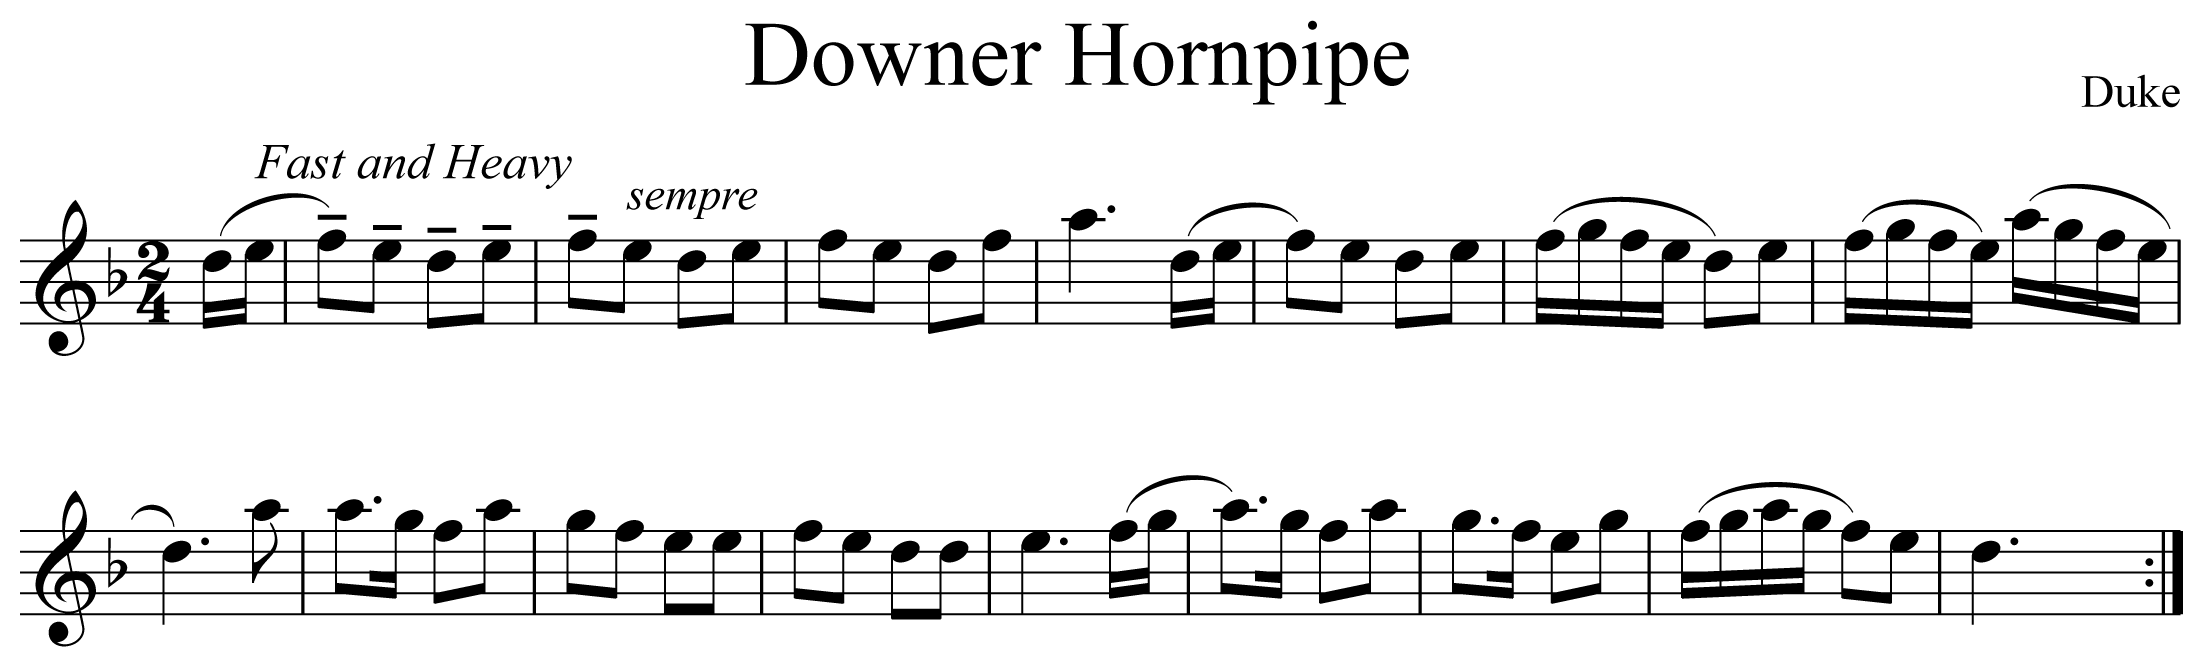 Downer Hornpipe Notation 